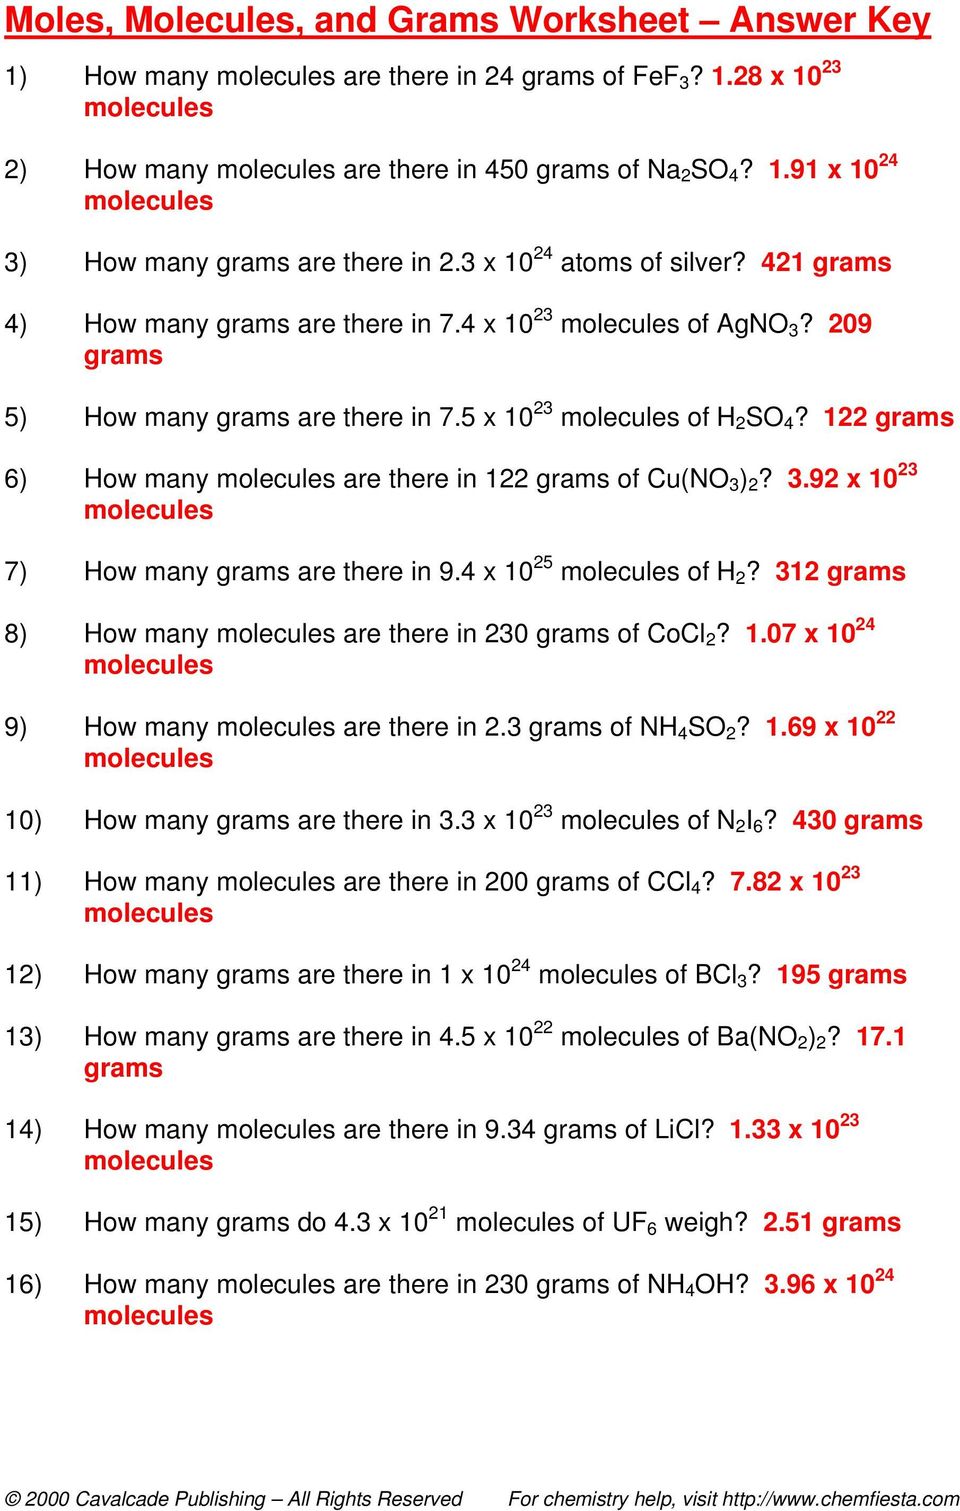 Moles, Molecules, and Grams Worksheet Answer Key - PDF Free Download Pertaining To Moles Molecules And Grams Worksheet